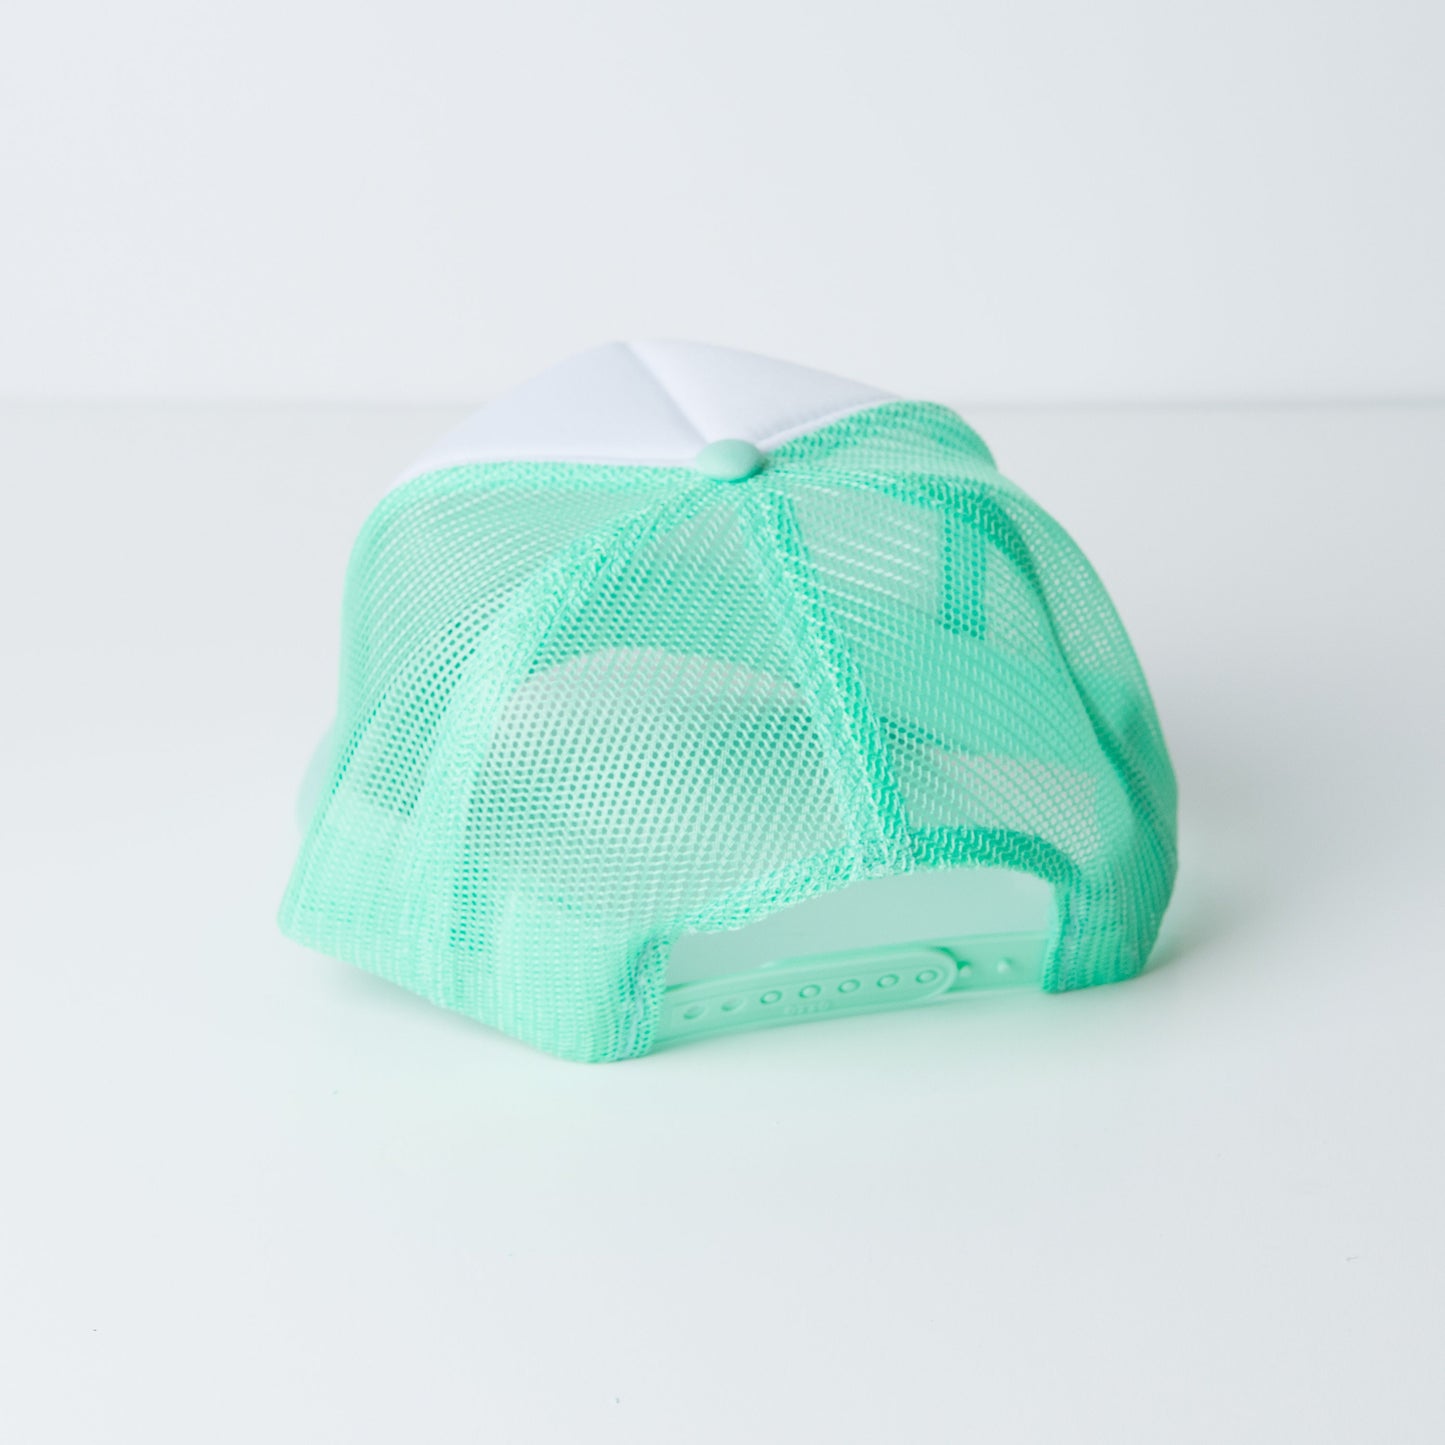 a green and white trucker hat on a white surface